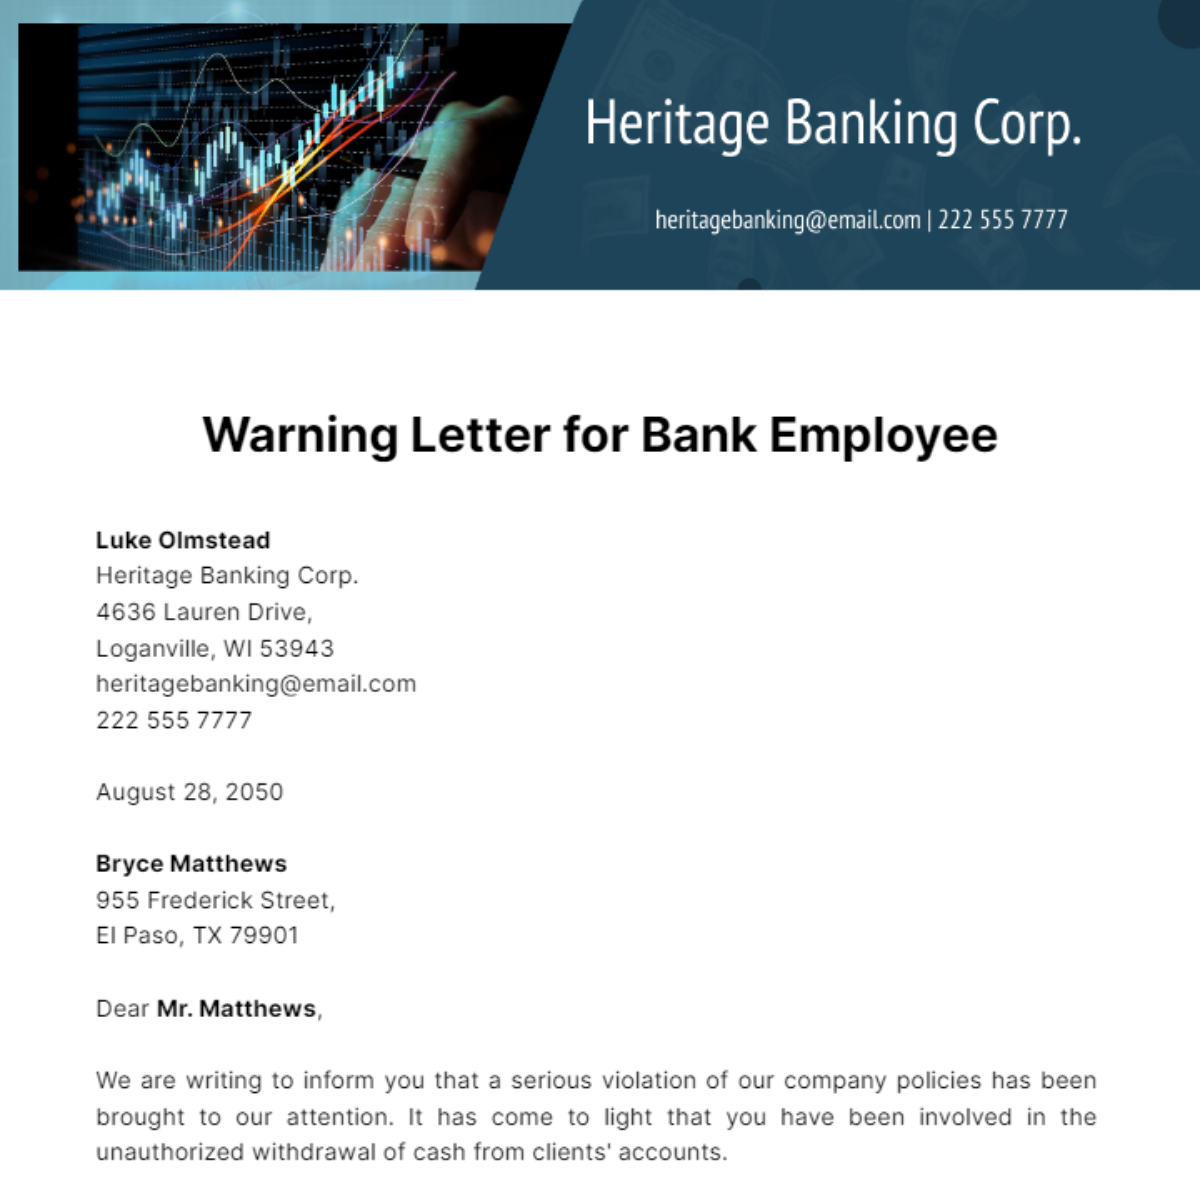 Warning Letter for Bank Employee Template